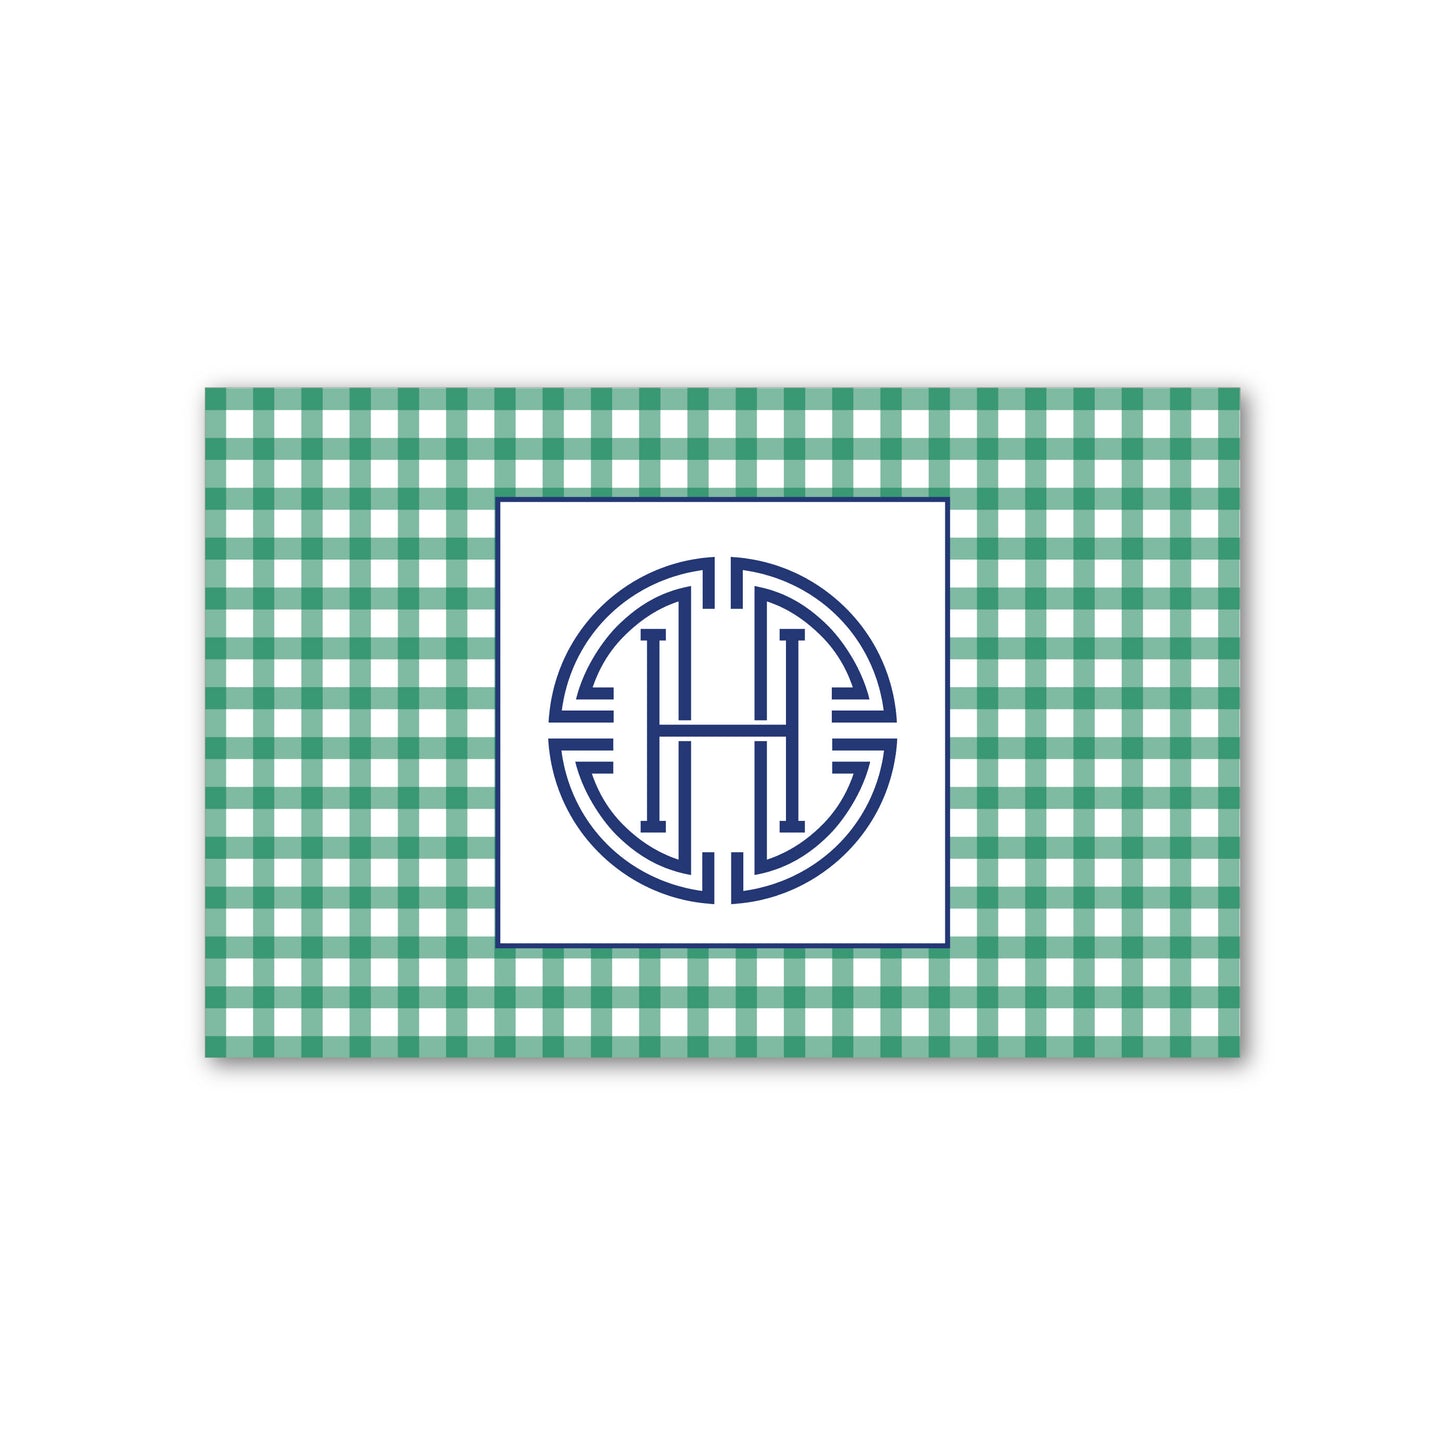 Laminated Placemat   |   Green Gingham with Navy Monogram